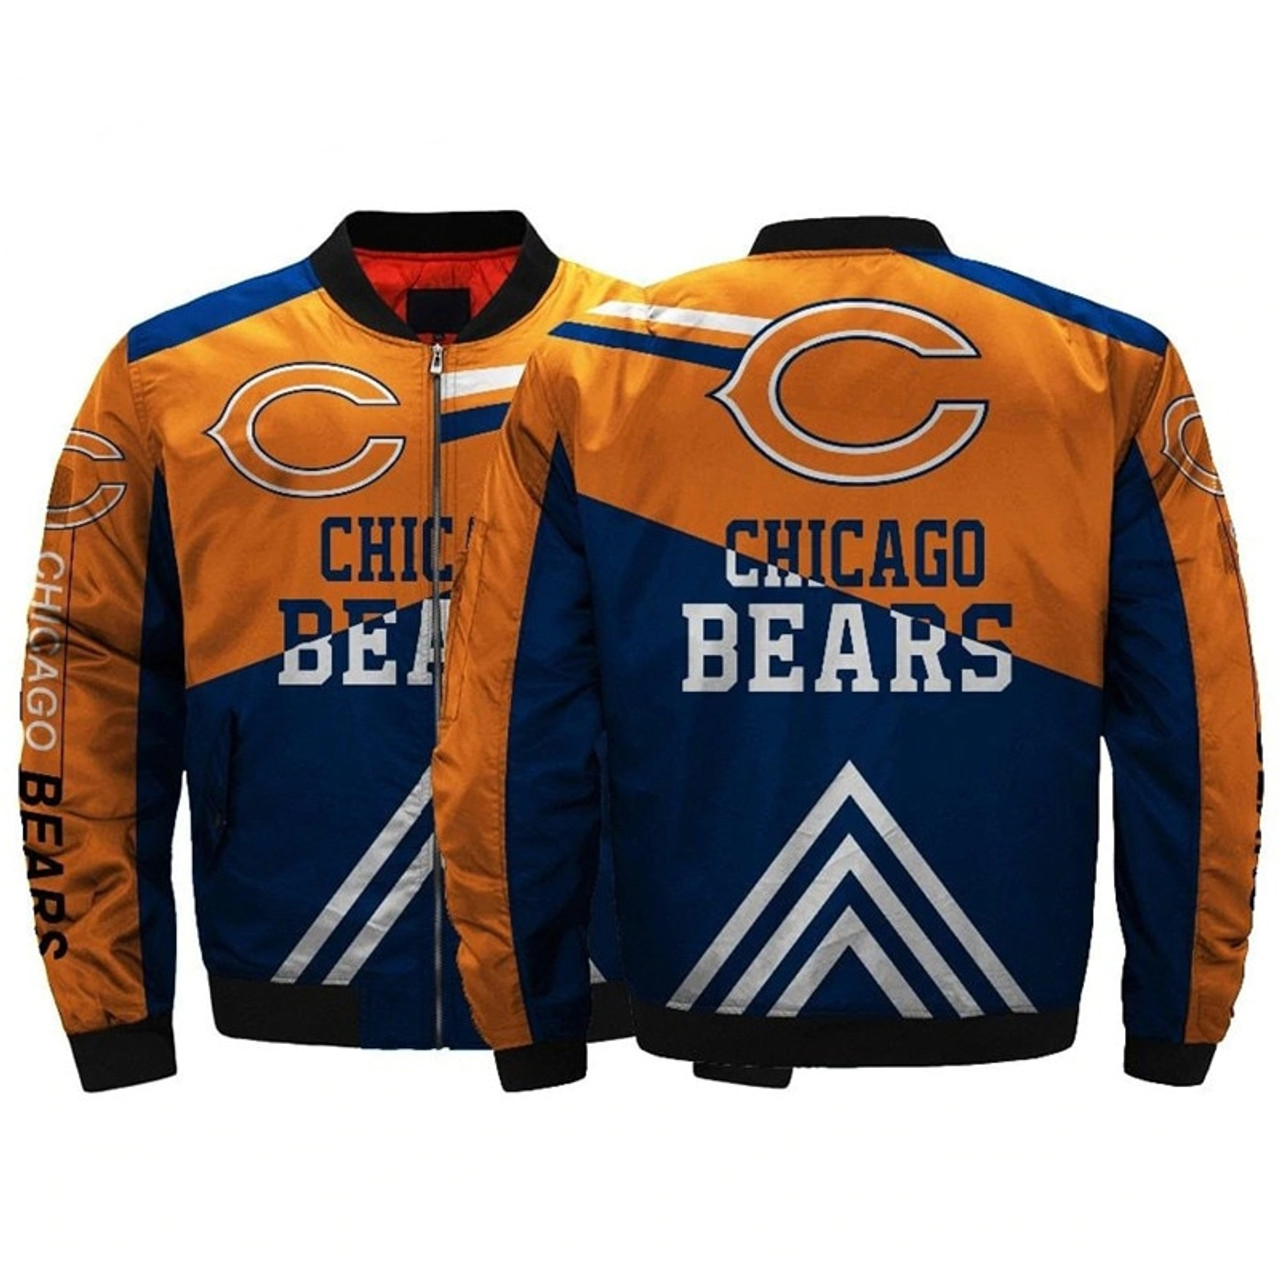 N.F.L.CHICAGO-BEARS-JACKETS 